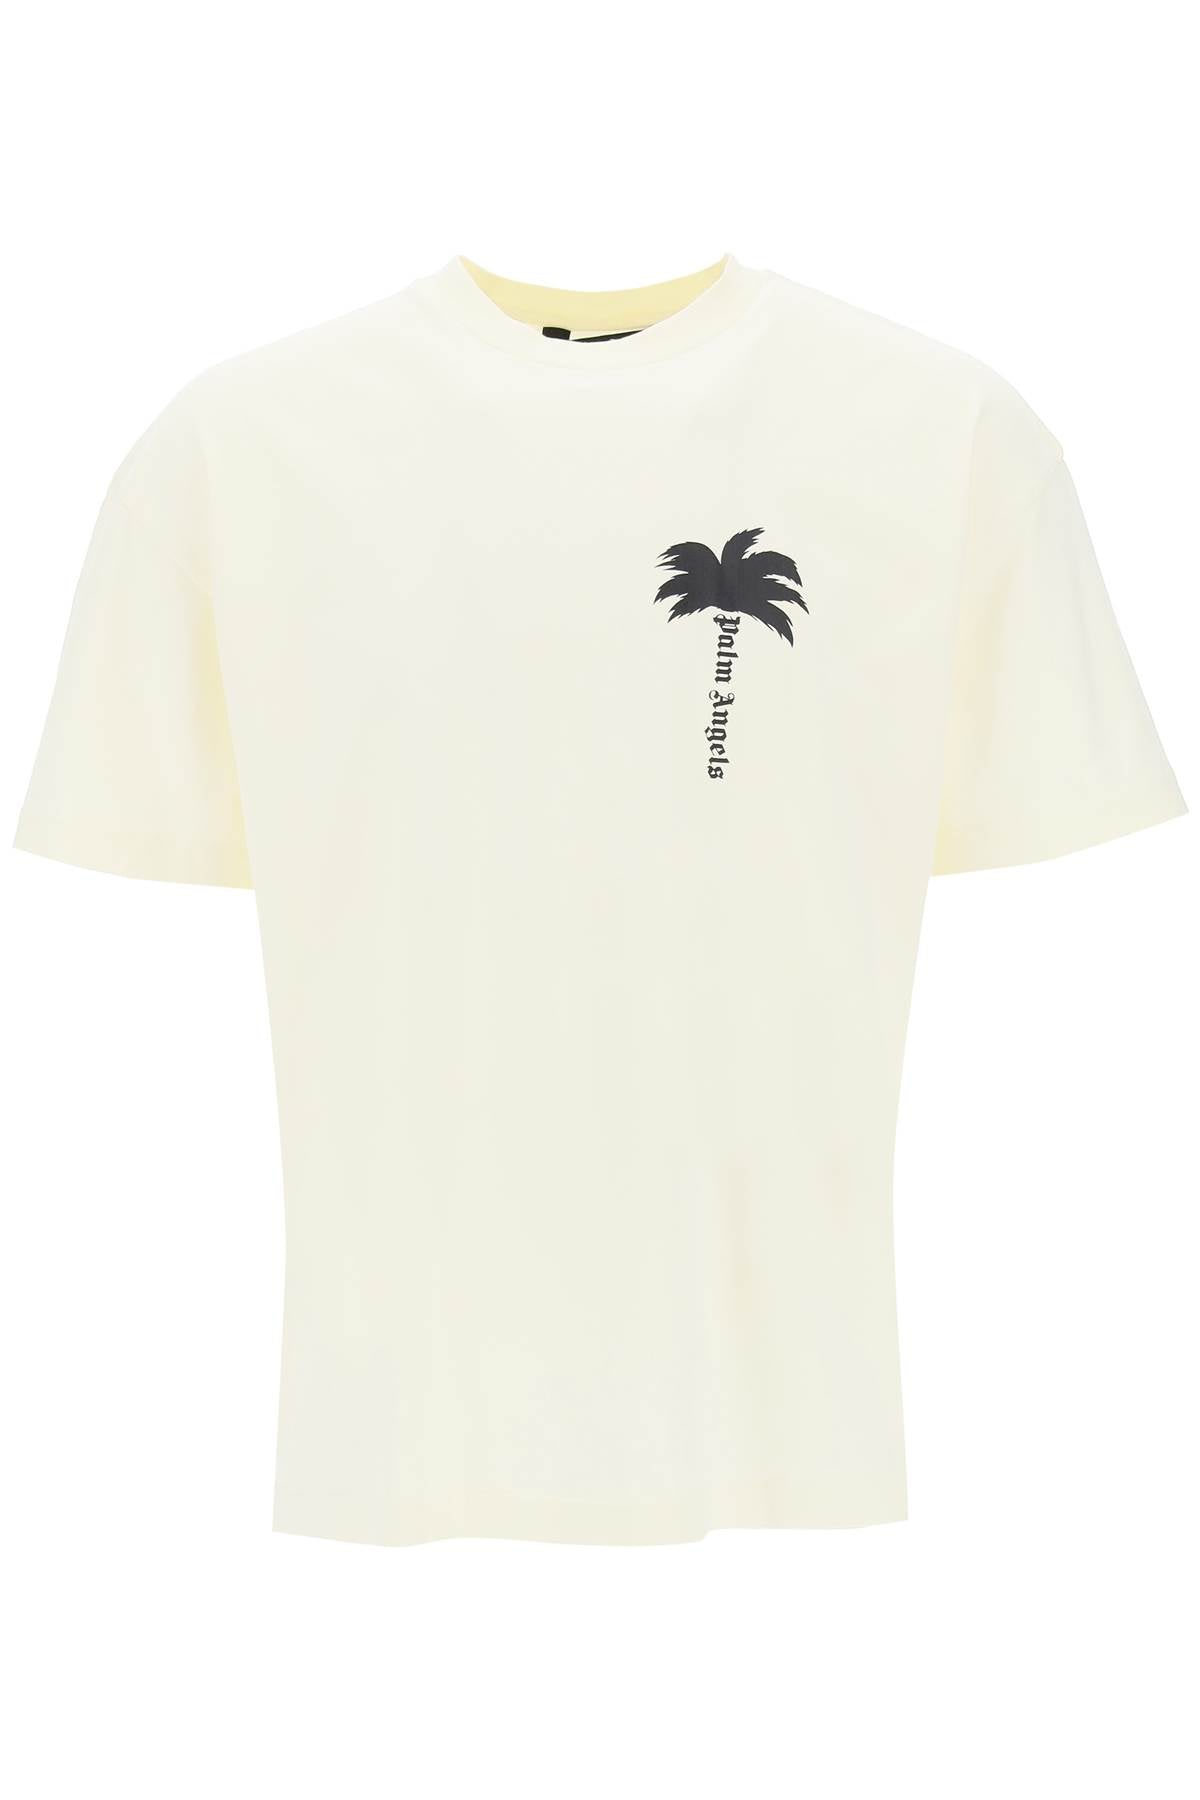 Palm angels palm tree graphic t-0